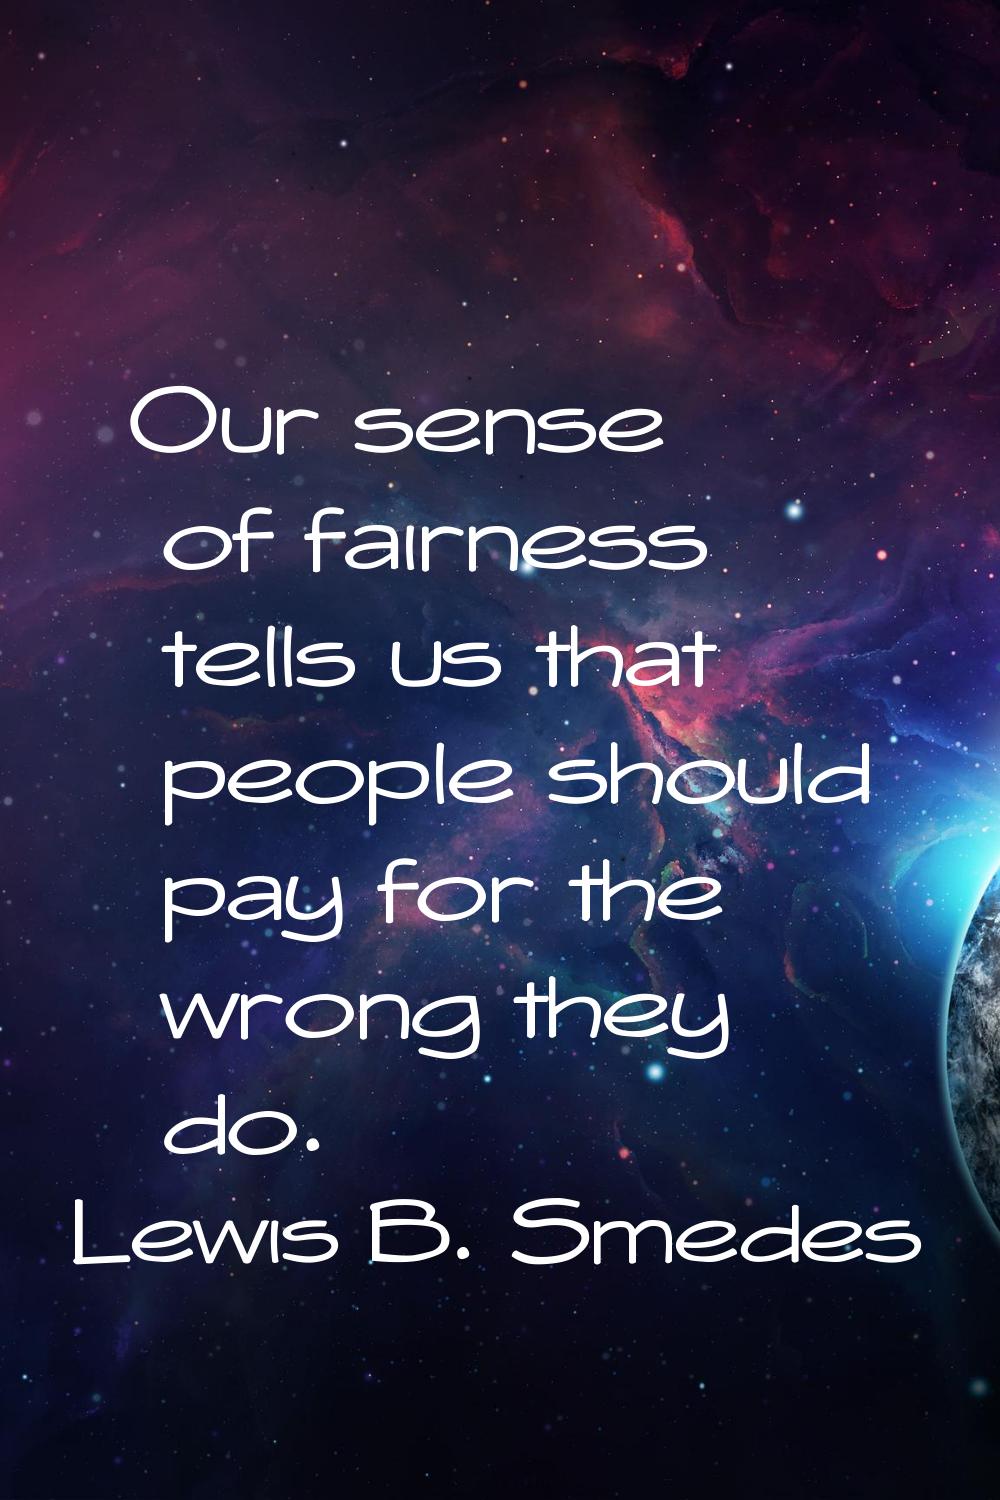 Our sense of fairness tells us that people should pay for the wrong they do.